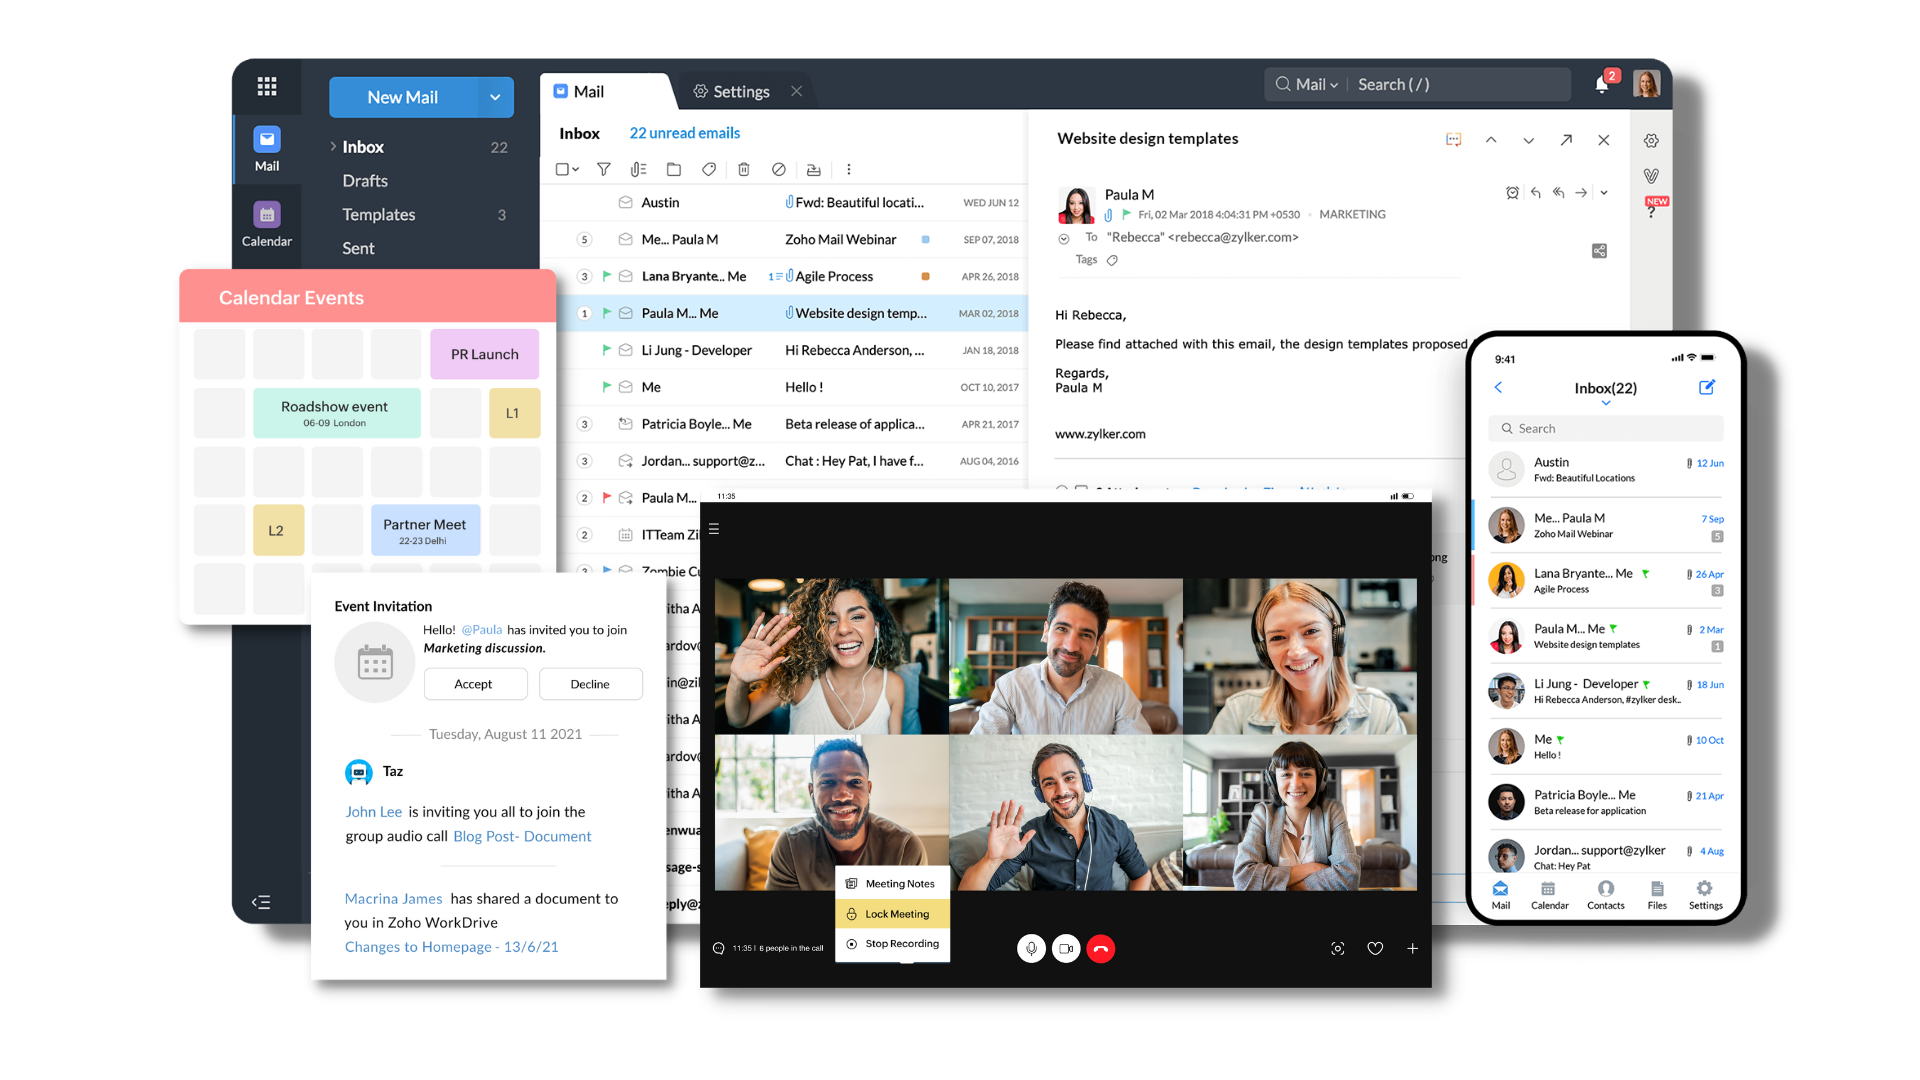 Cloud Based Communication And Collaboration Suite